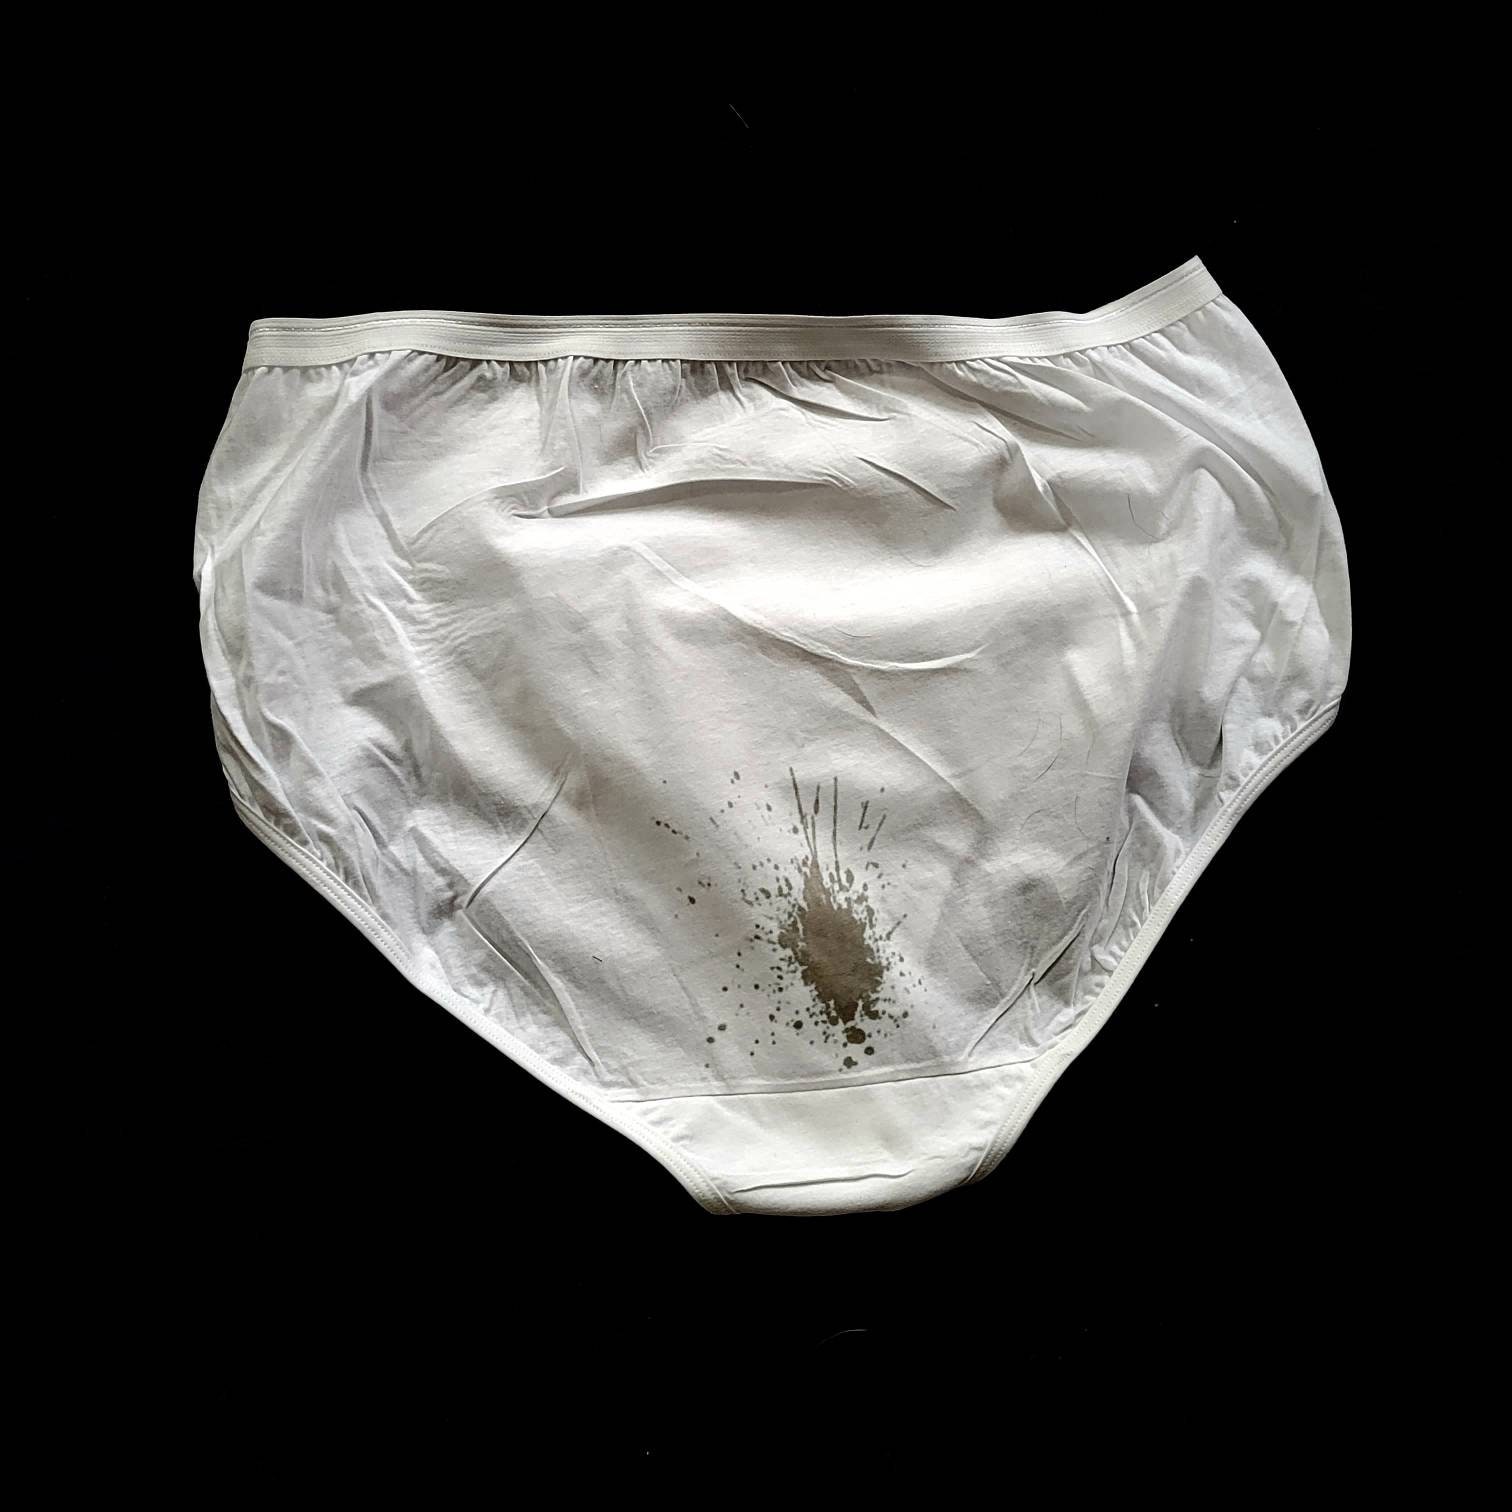 Gag Gift, Shartwear Pre-stained Underwear, Funny Gift for Friend, Poop Stain  Underpants, Fun Gift, White Elephant, Humor Gift, Shit Happens 